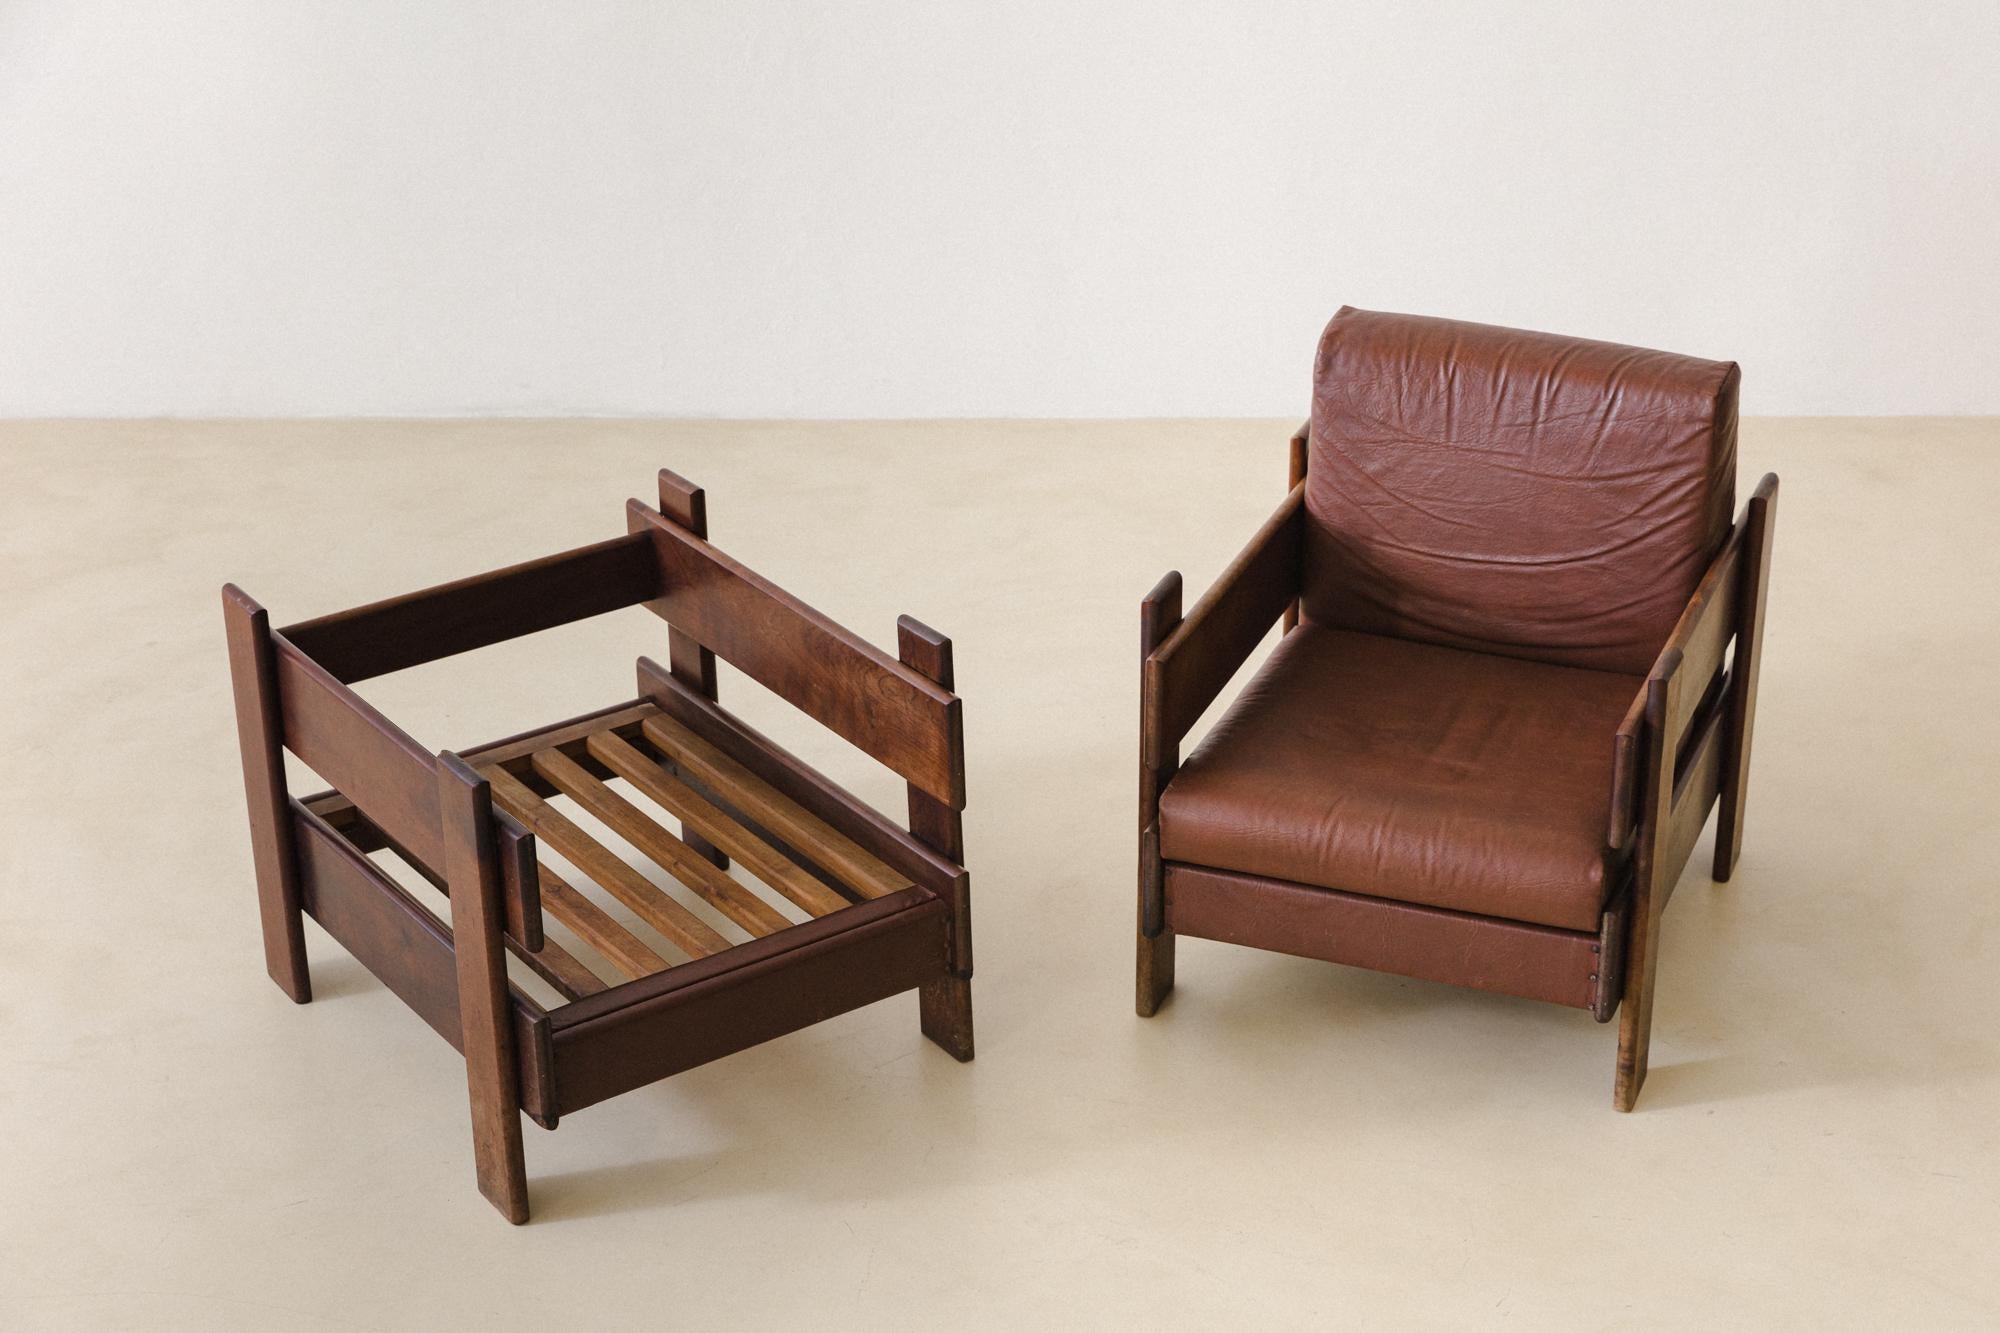 This beautiful pair of solid Imbuia (Brazilian Walnut) armchairs were manufactured in the 1960s by the Brazilian company Casulo, and the authorship is still unidentified by our team. The armchairs have a squared design with large slats and are in